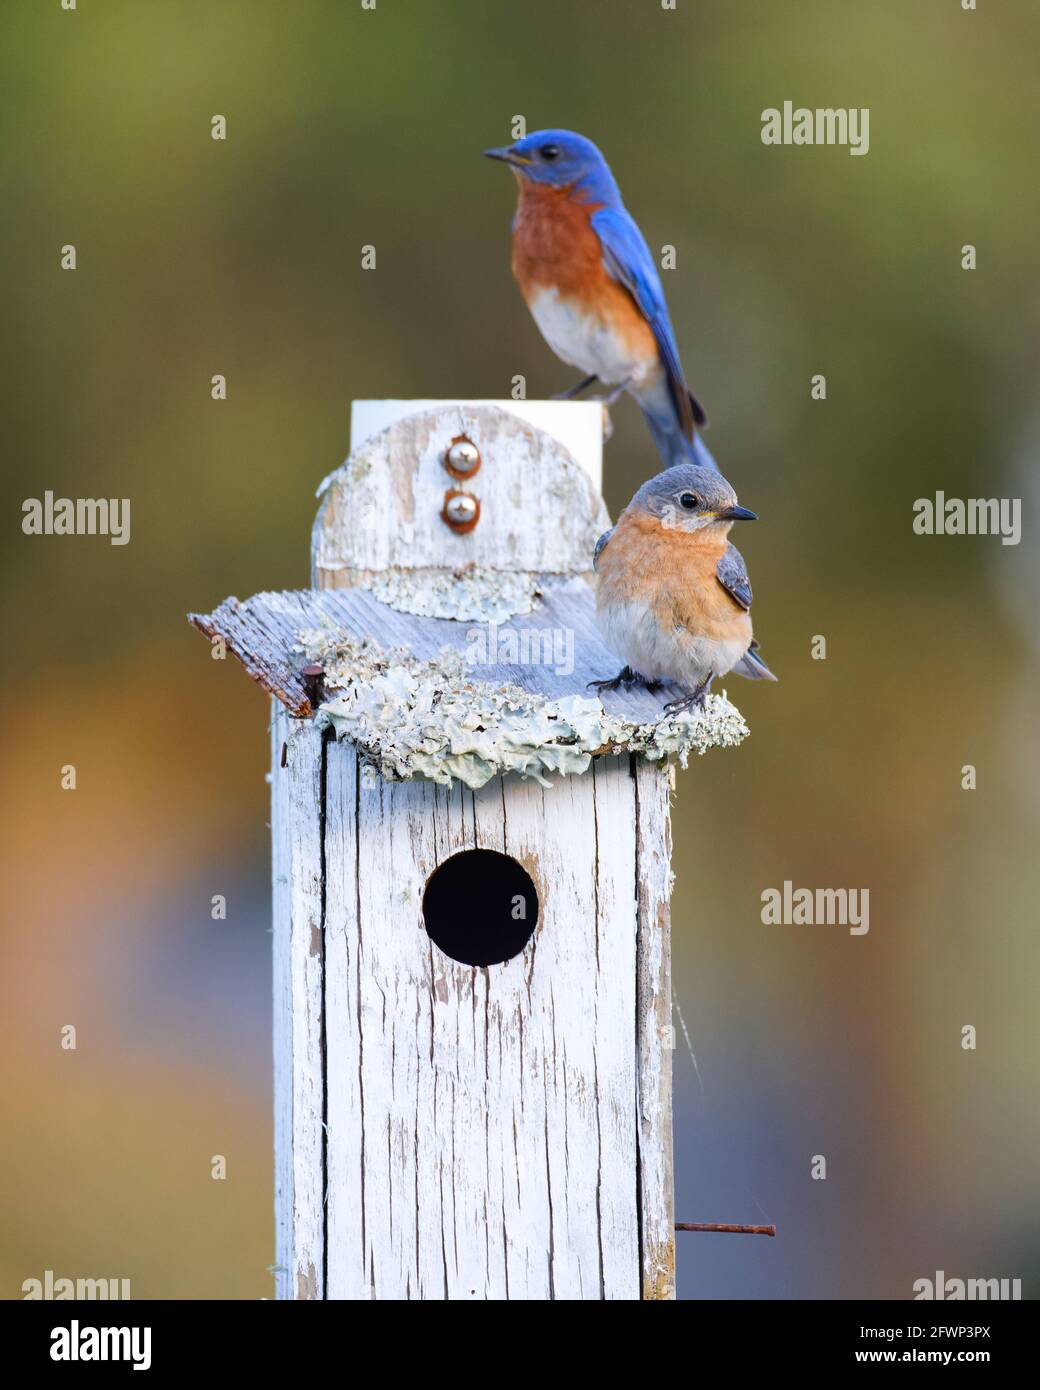 A mated pair of Eastern Bluebirds (Sialia sialis) perched on a lichen-covered bird house containing their recently hatched chicks.  The female (foregr Stock Photo